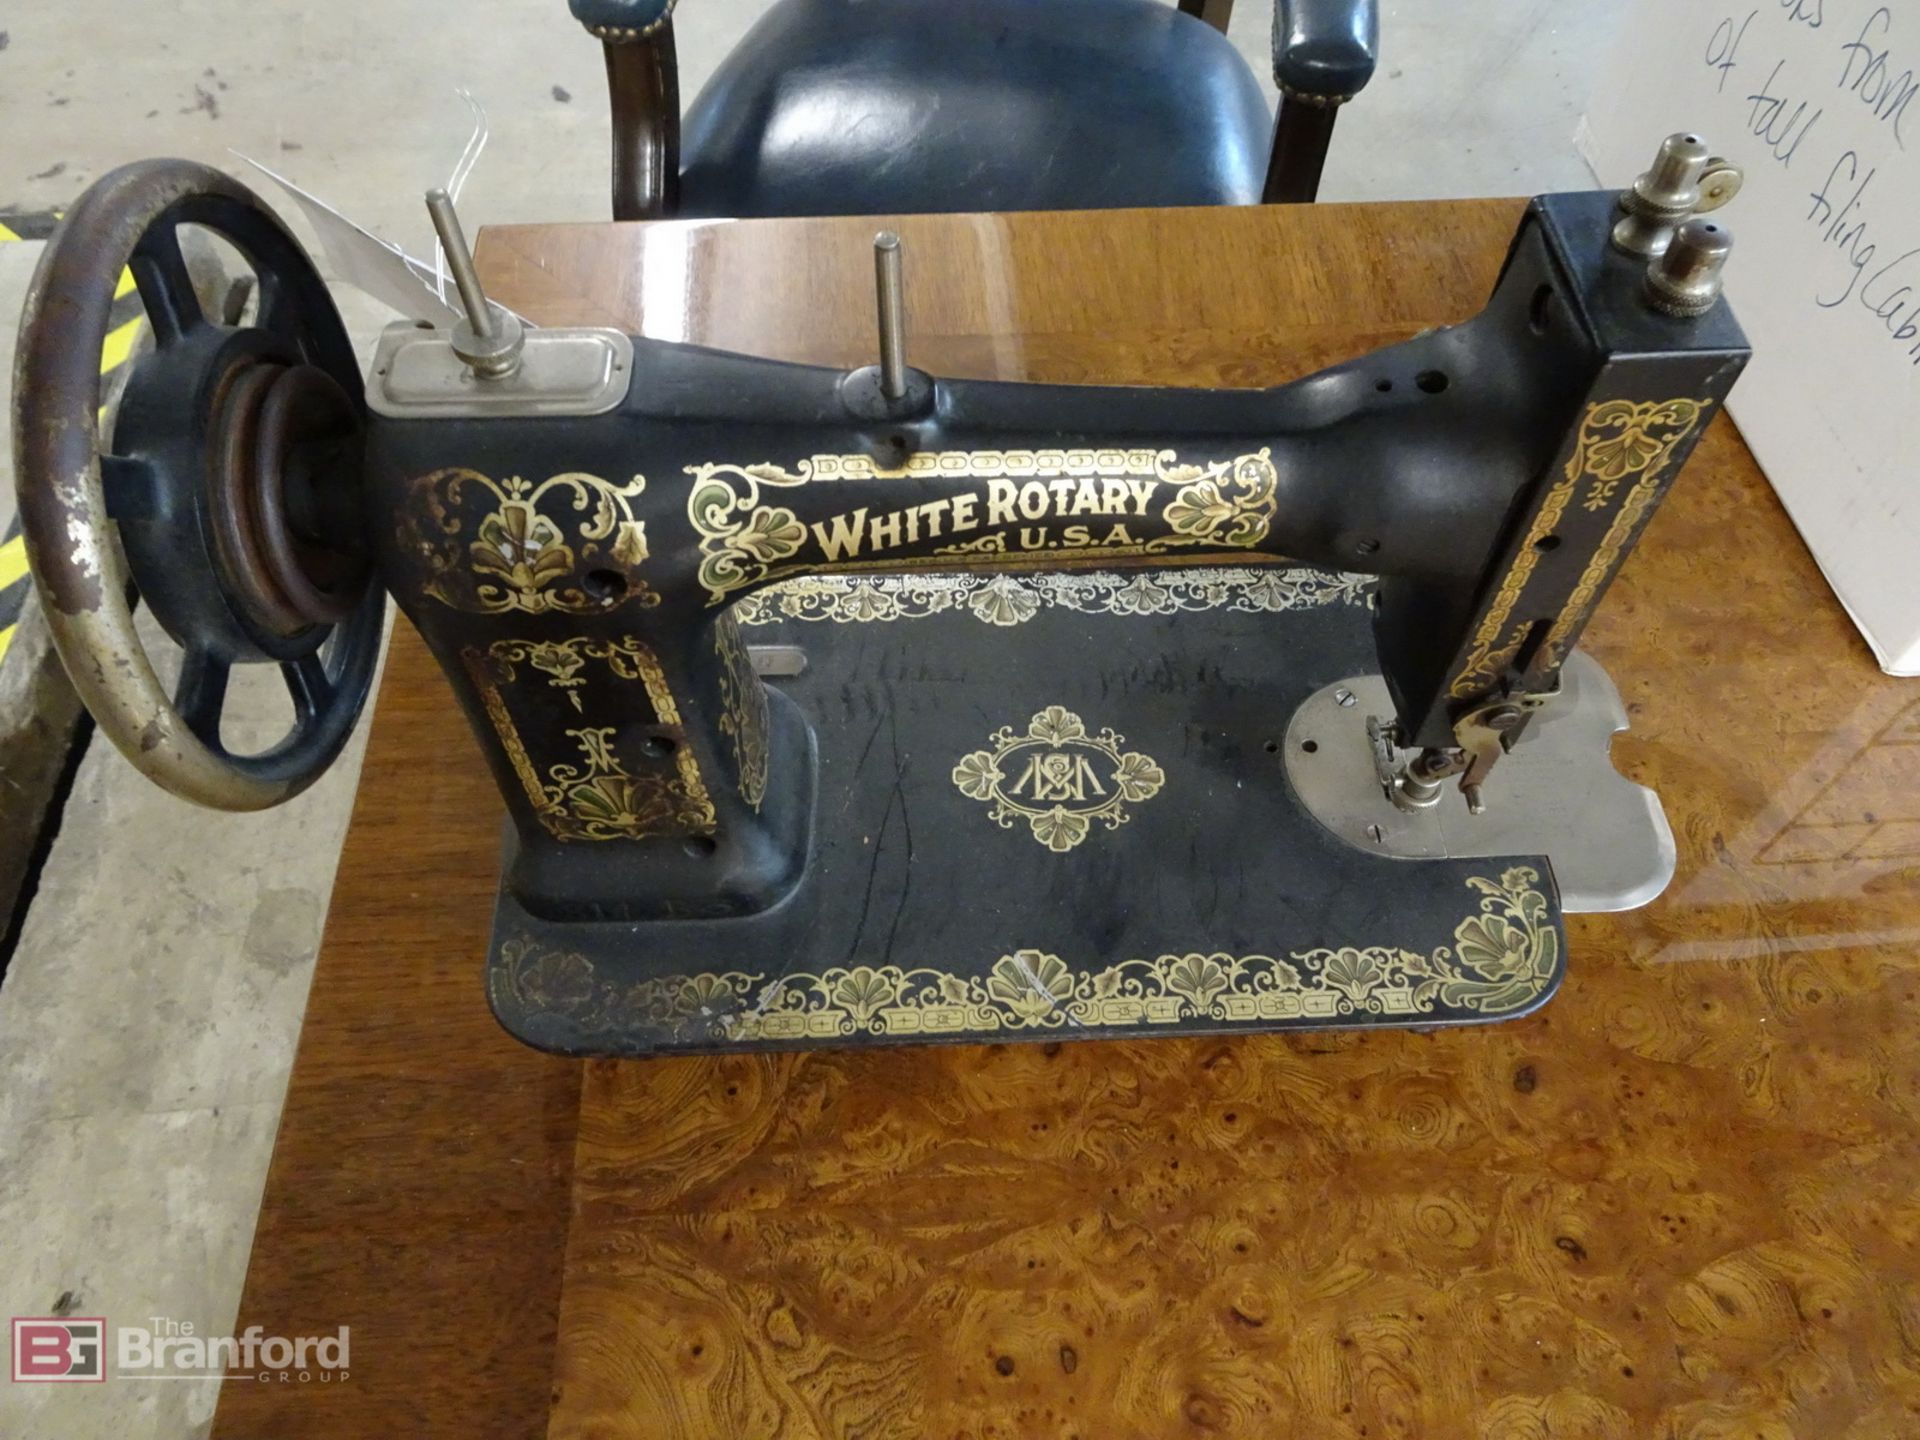 Vintage White Rotary U.S.A Sewing Machine FR 2383085 - Image 2 of 5